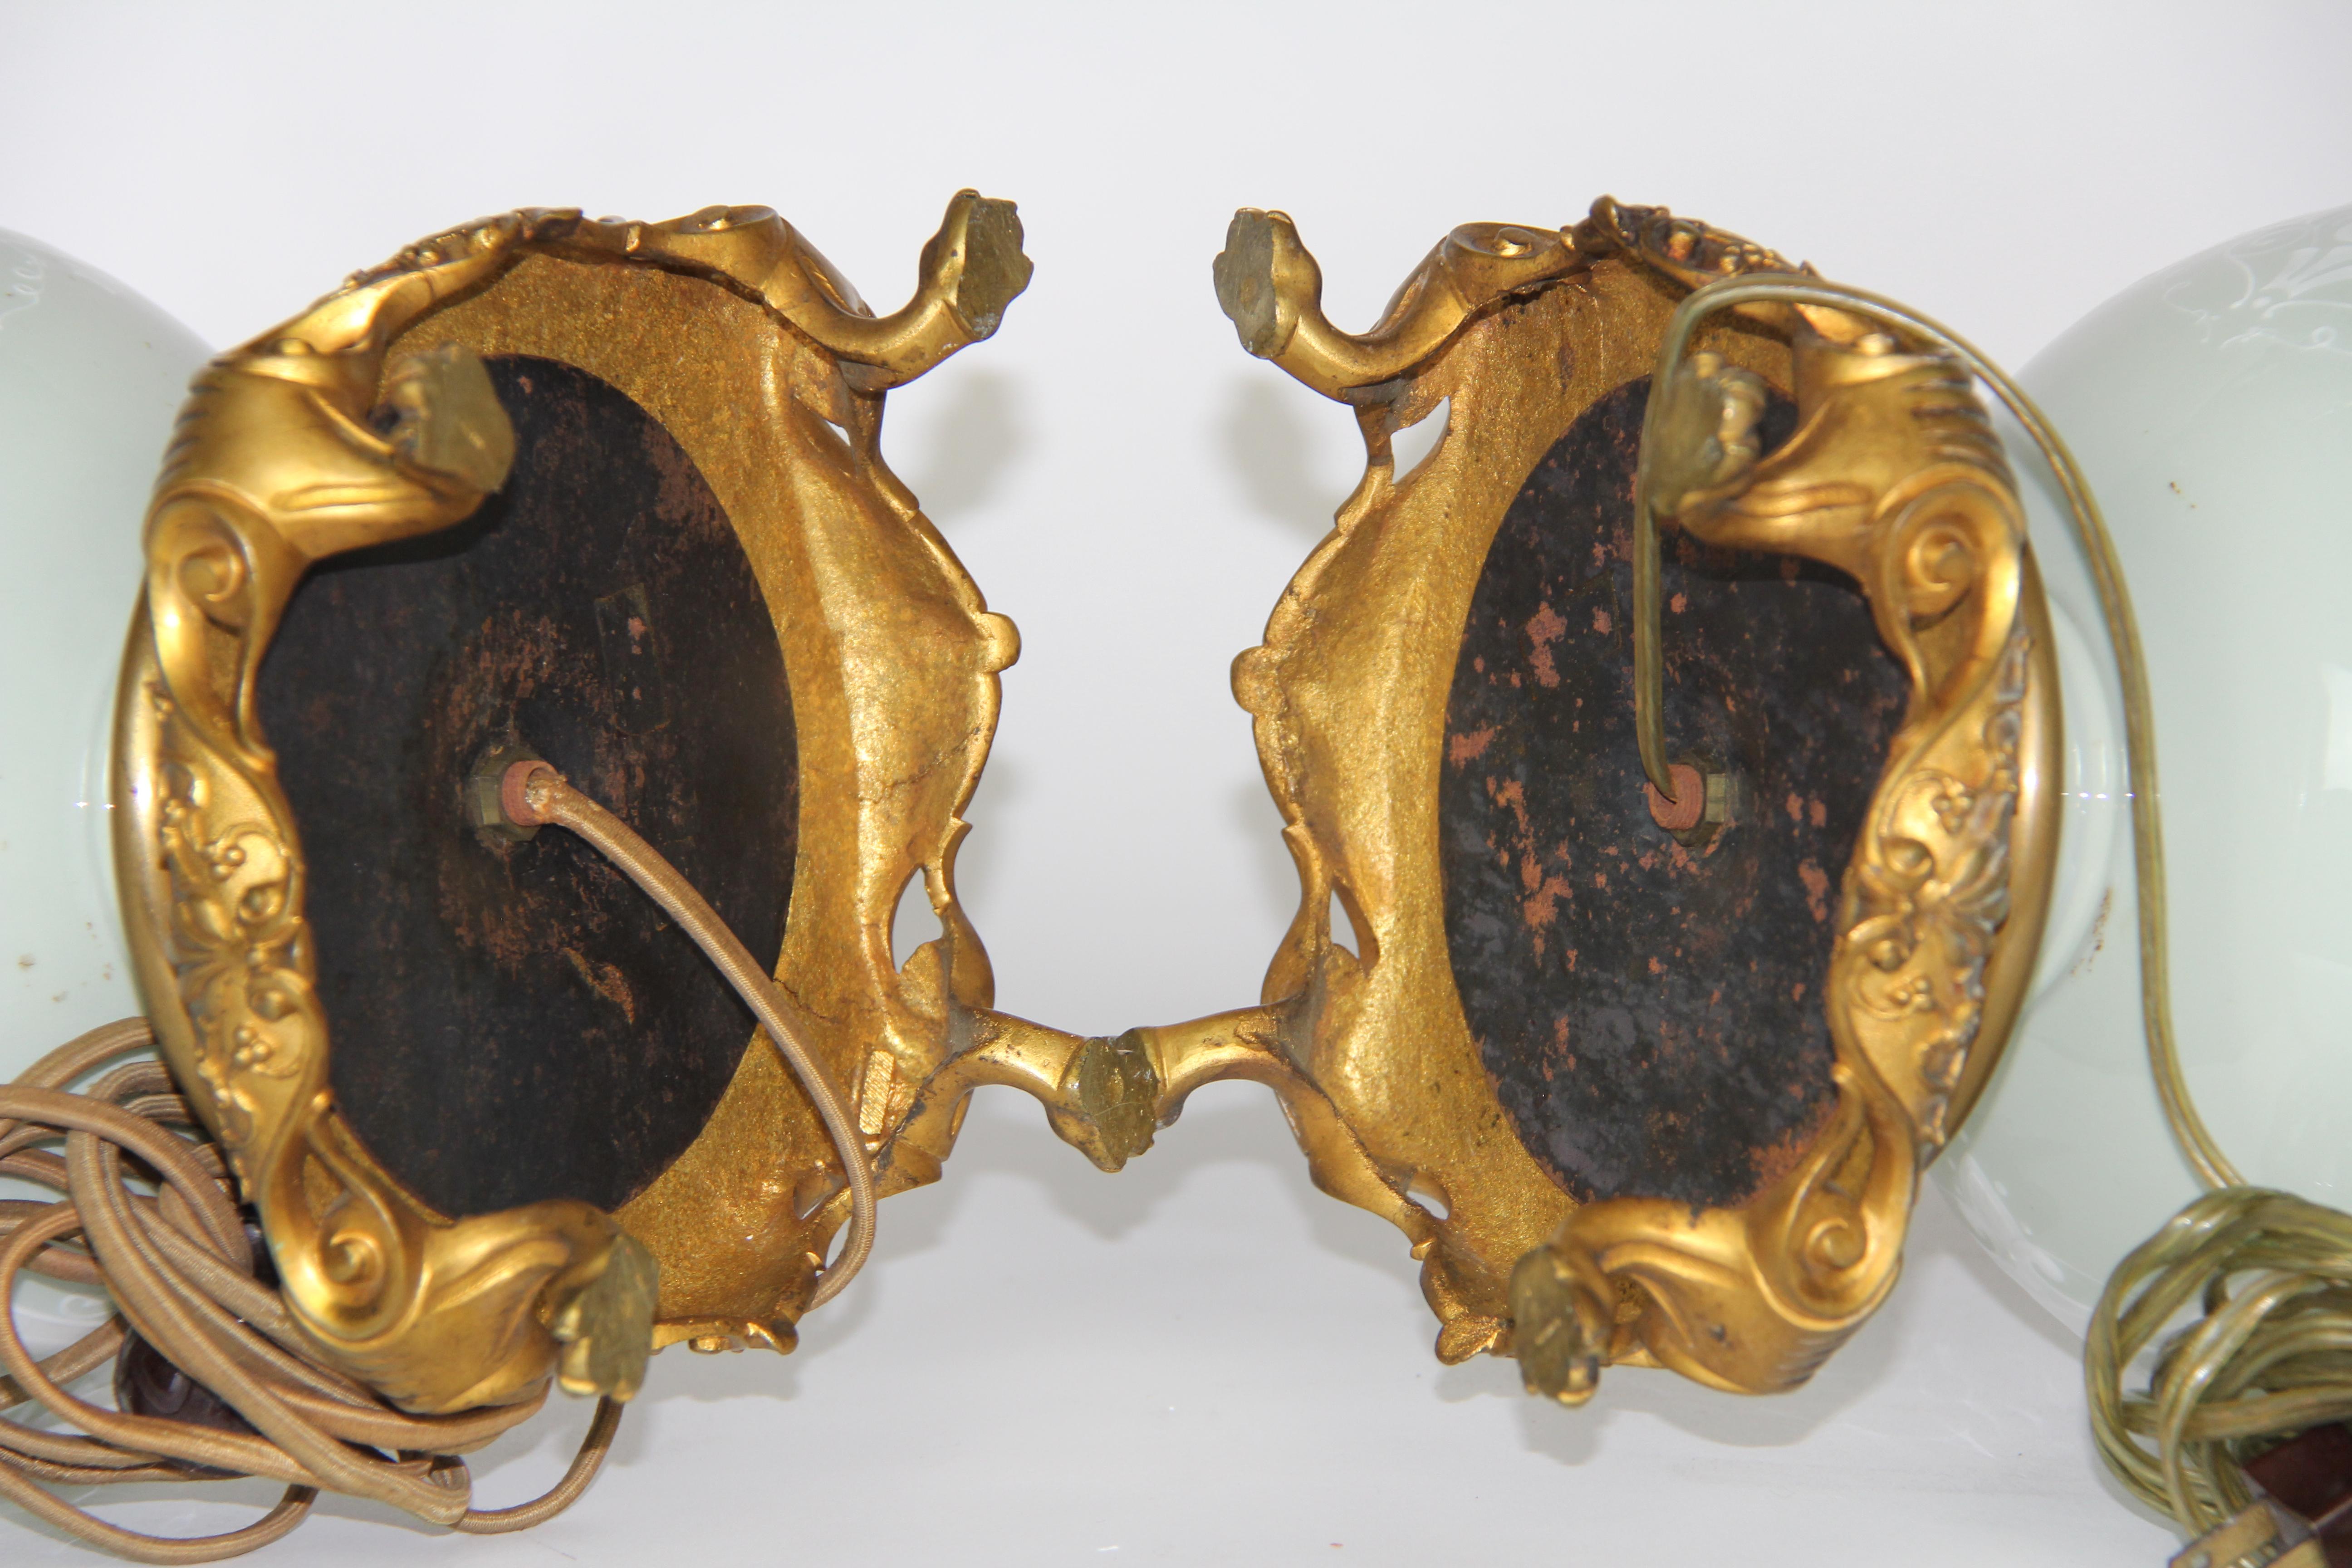 French Gilt Bronze Mounted Double-Sided Pate Sur Pate Celadon Ground Lamps, Pair For Sale 10